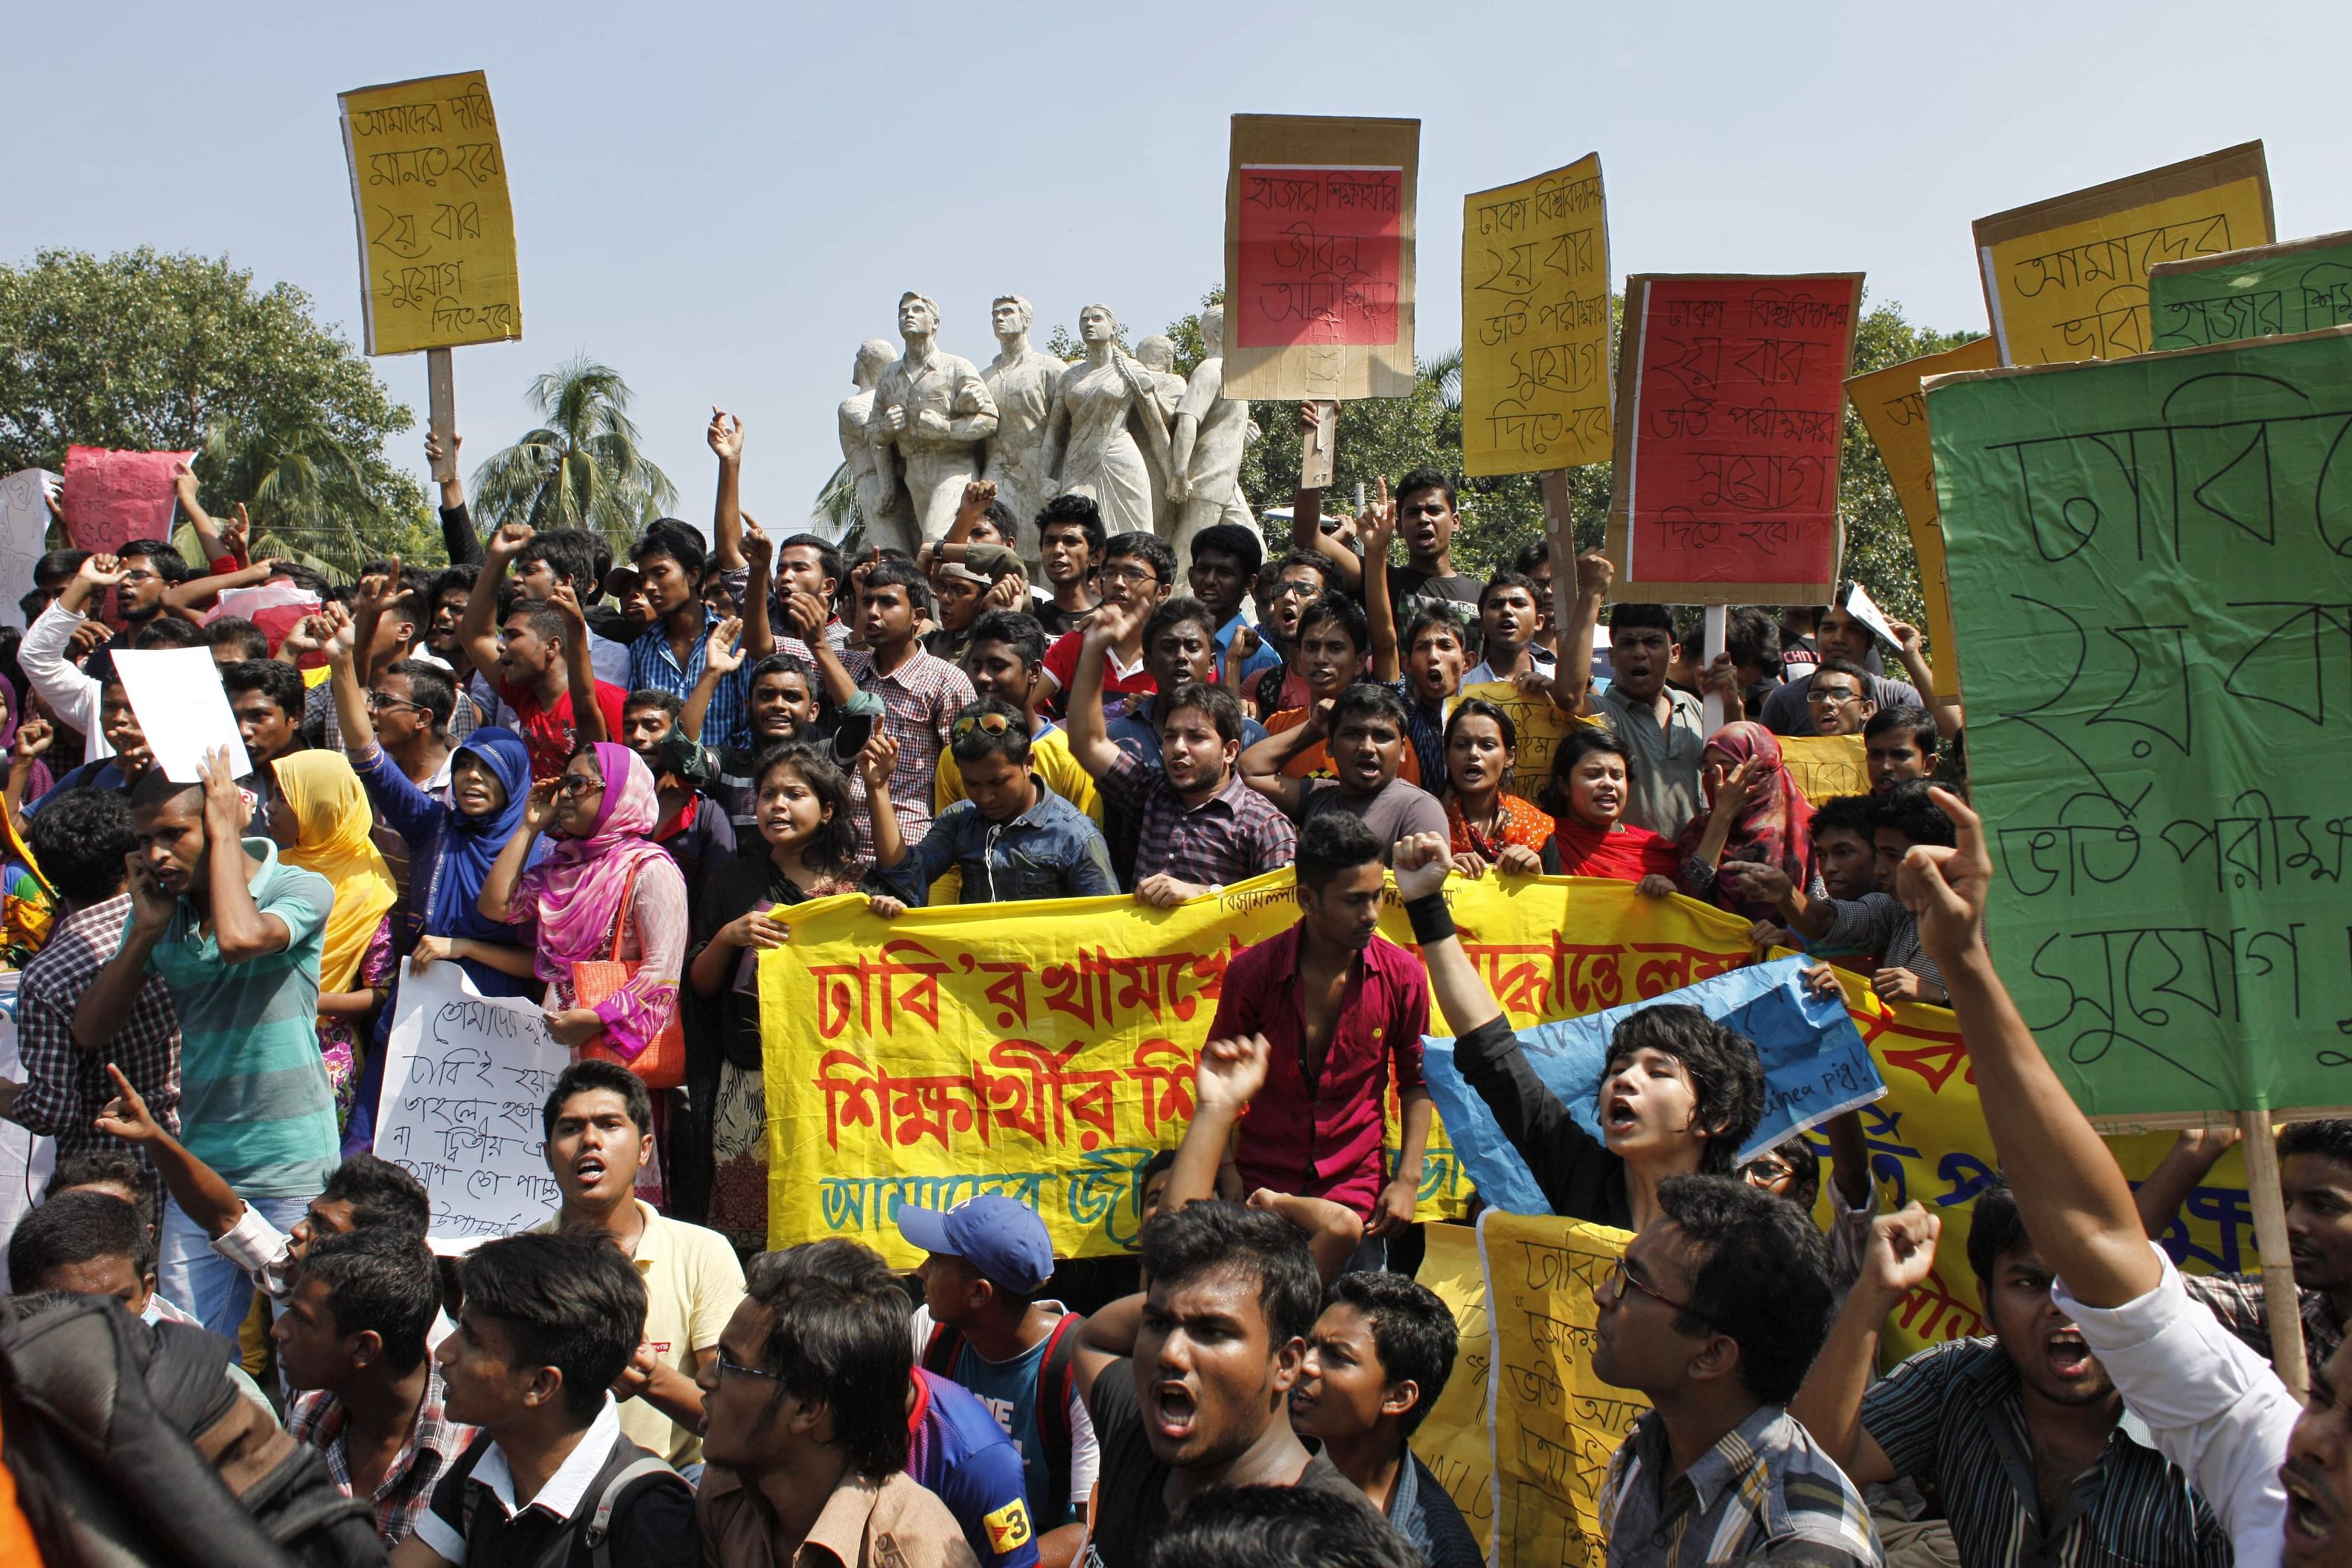 Students who had taken the Dhaka University admission test this year stage a protest at the base of Shontrash Birodhi Raju Sharok Bhaskorjo yesterday demanding that the university authorities enforce from 2016 instead of next year its provision to not allow students to sit for the exam more than once. Photo: Star